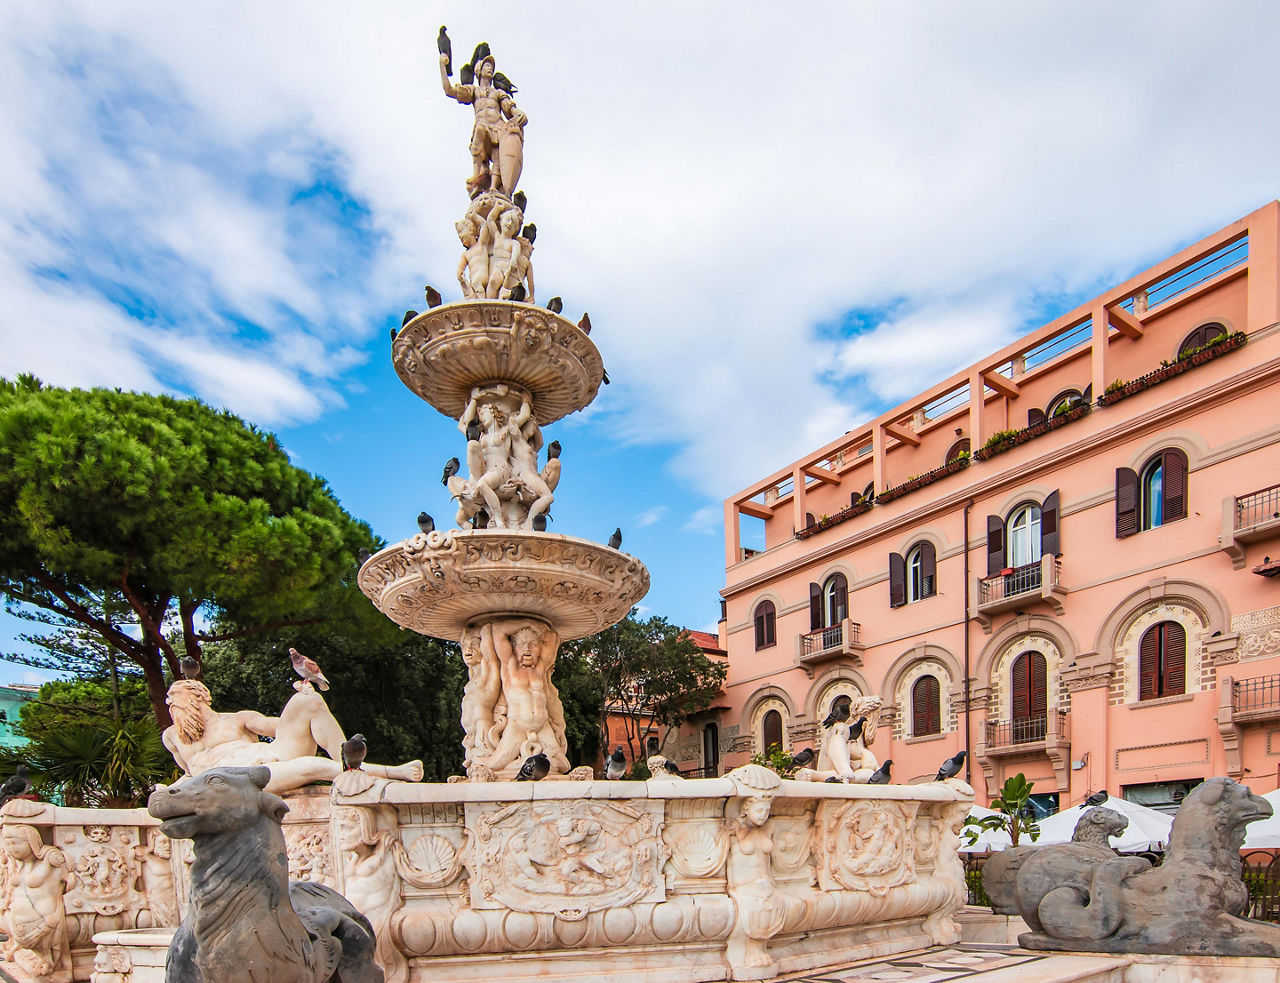 Orions fountain in Sicily (Messina), Italy